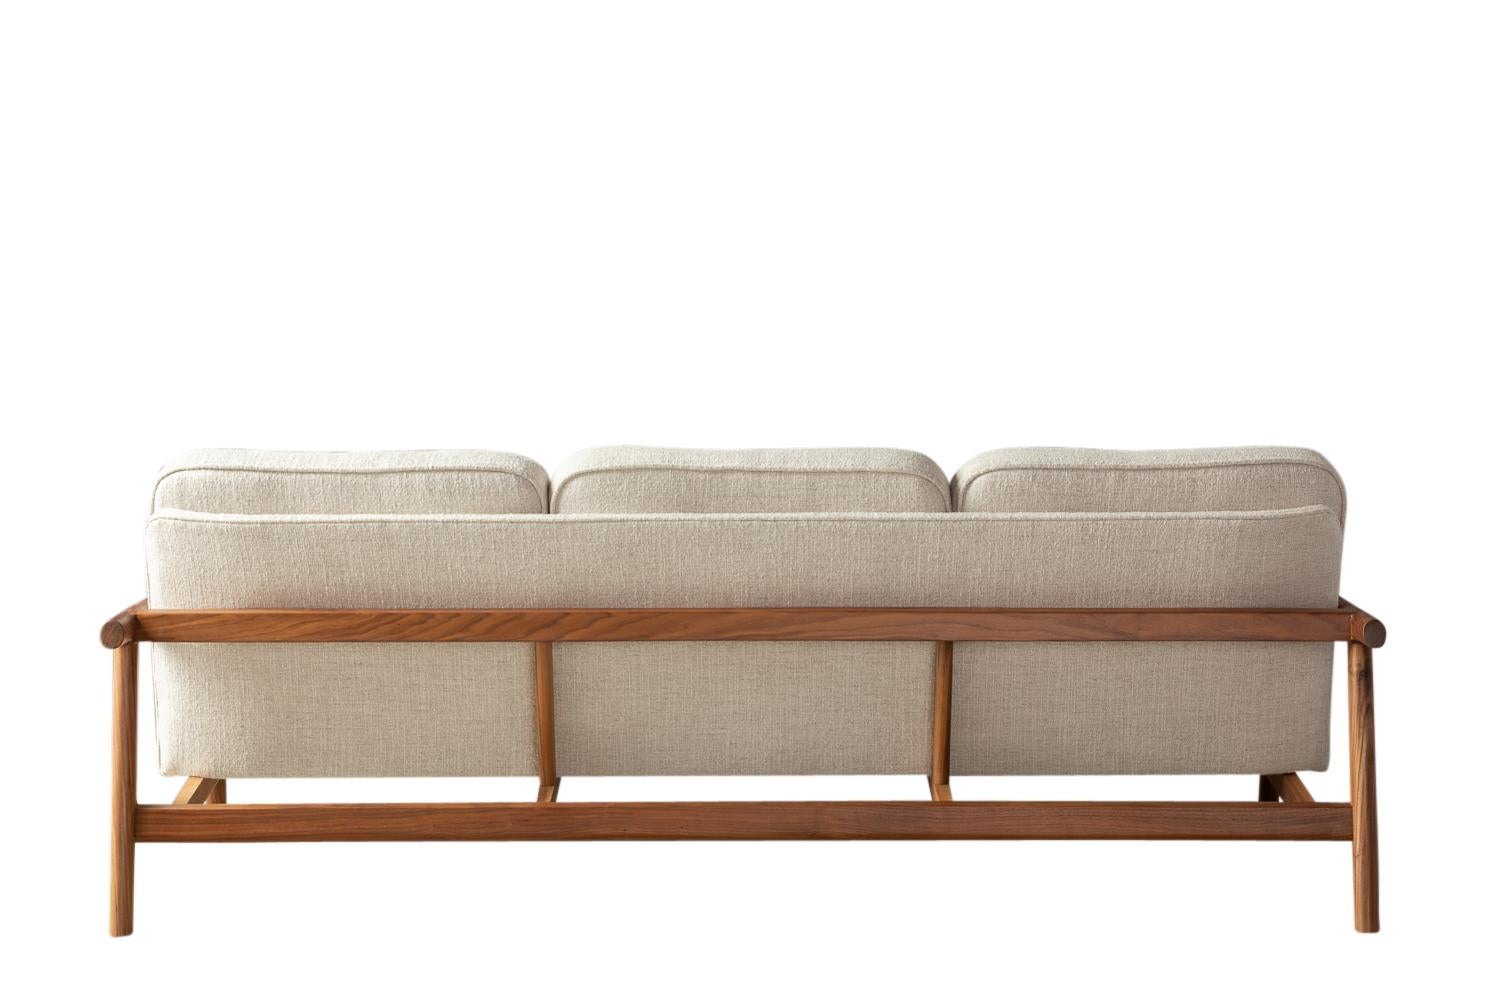 Mid-Century Modern Handcrafted Walnut Moresby Sofa with Custom Linen or Leather Upholstery For Sale